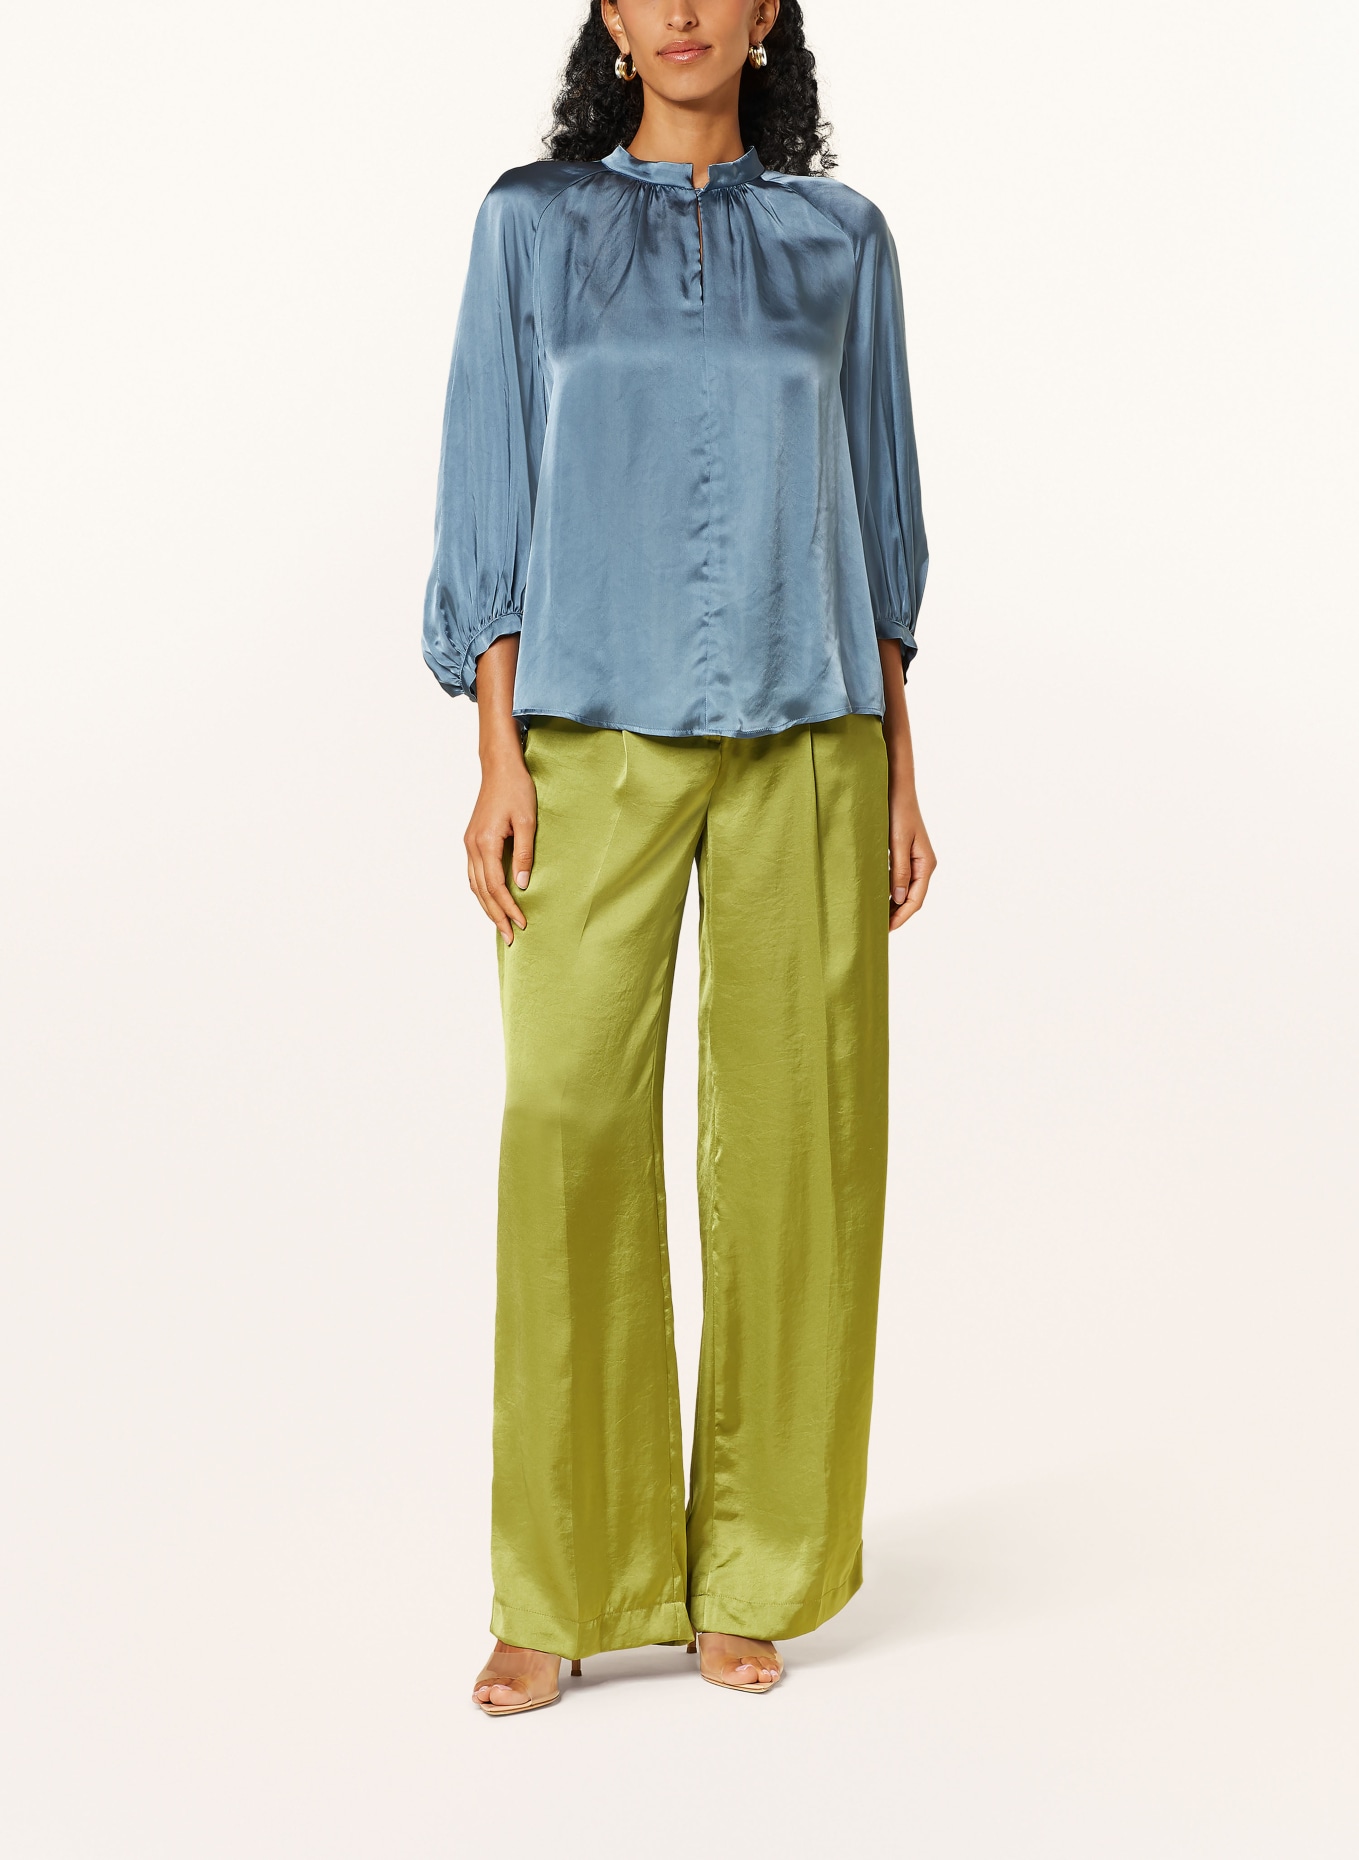 LUISA CERANO Shirt blouse made of satin with 3/4 sleeves, Color: BLUE GRAY (Image 2)